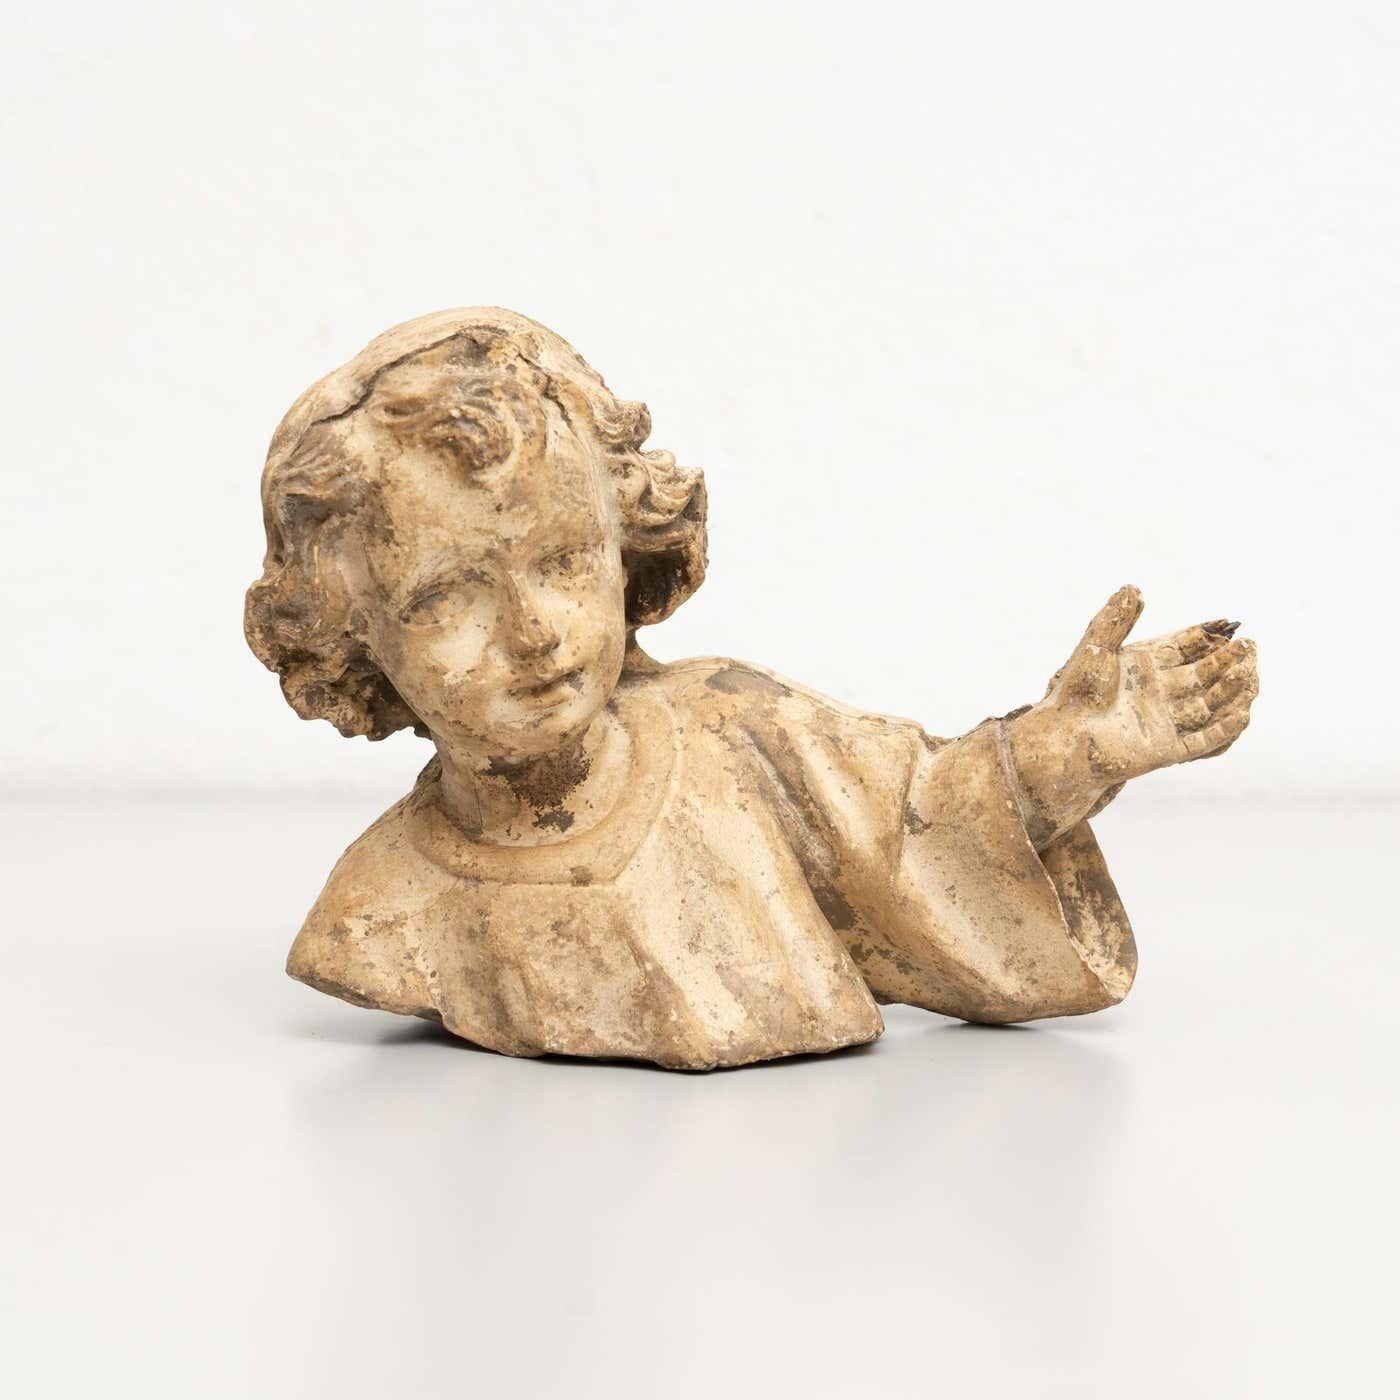 Traditional religious plaster figure of a baby Jesus.

Embodied within this exquisite plaster figure, portraying the beloved infant Jesus, is a sacred aura of tradition. 
Crafted in a traditional Catalan atelier nestled in Olot, Spain, around 1950,